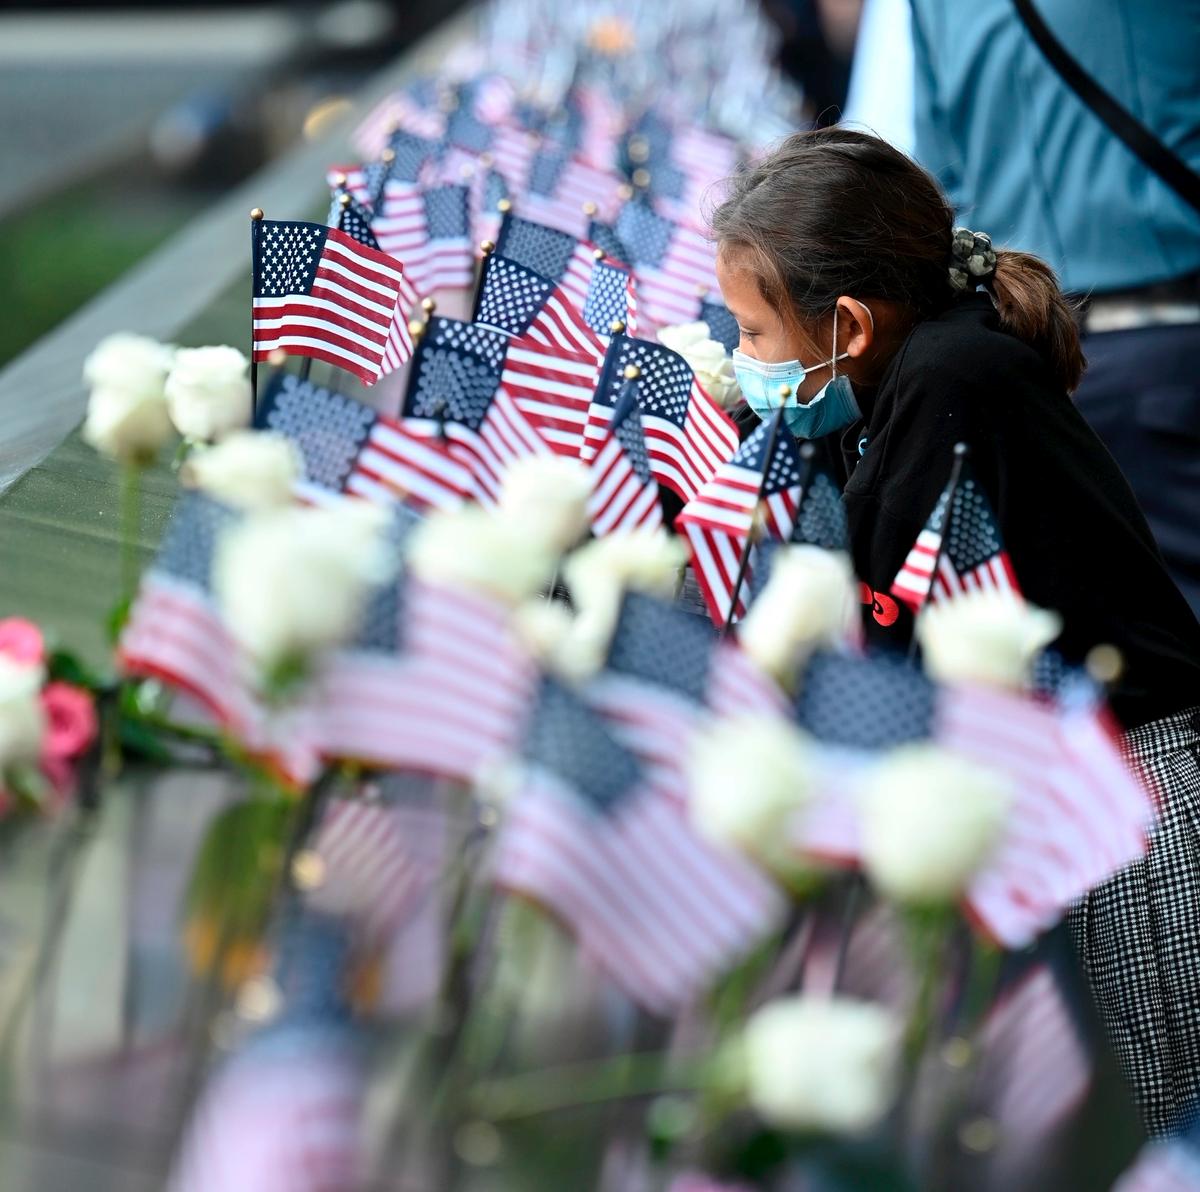 A family member at the reflecting pool places a flag during a ceremony at the National September 11 Memorial & Museum commemorating the 20th anniversary of the Sept. 11 terror attacks, in New York on Sept. 11, 2021. (David Handschuh-Pool/Getty Images)